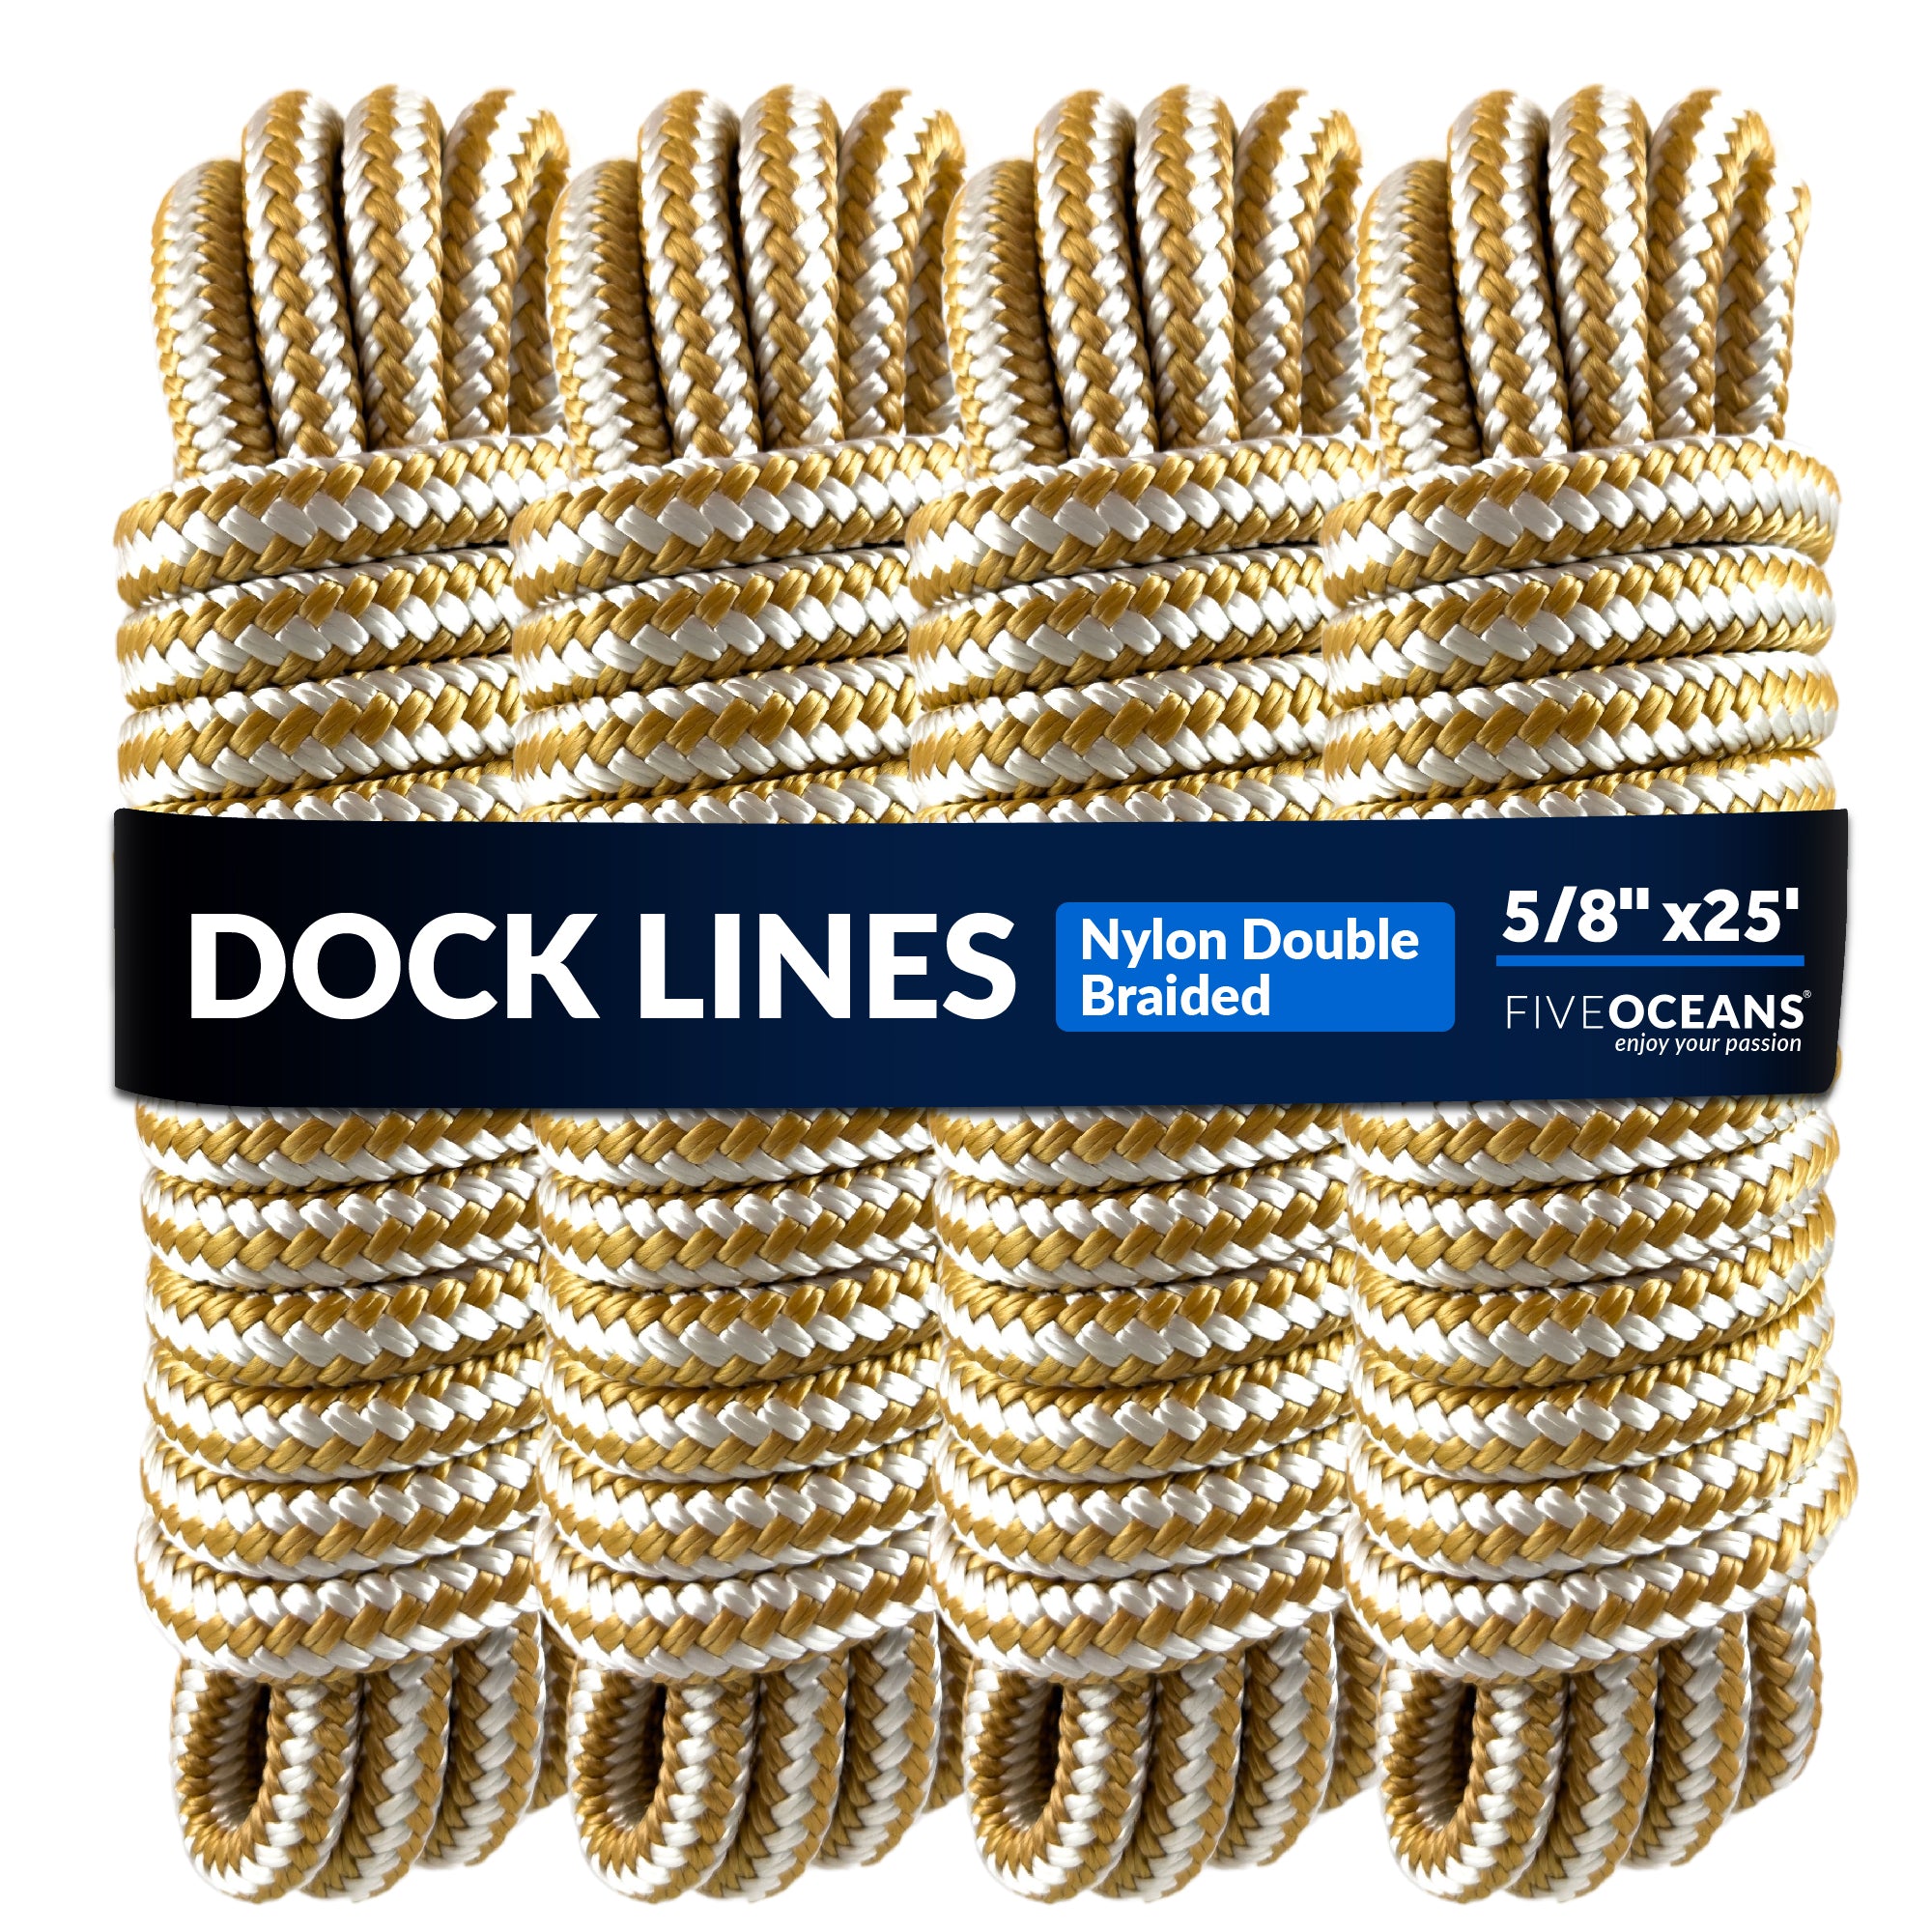 Five Oceans 4-Pack 5/8 inch x 25' Dock Lines, Boat Rope, Boat Ropes for Docking with Loop, Marine-Grade Gold & White Double Braided Nylon Dock Line